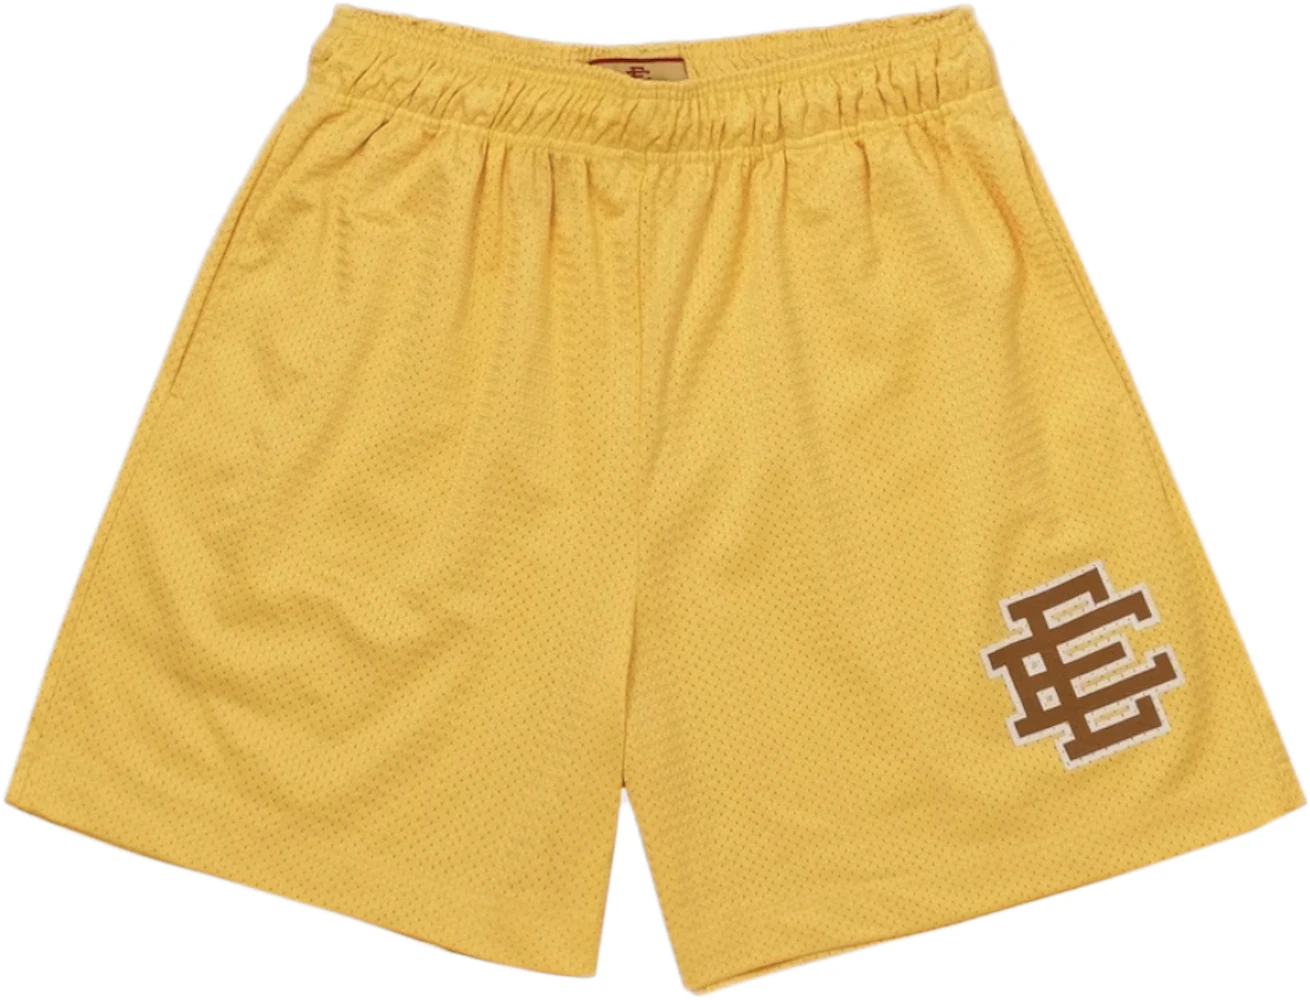 Eric Emanuel EE Basic Short Canary Yellow Men's - SS20 - US